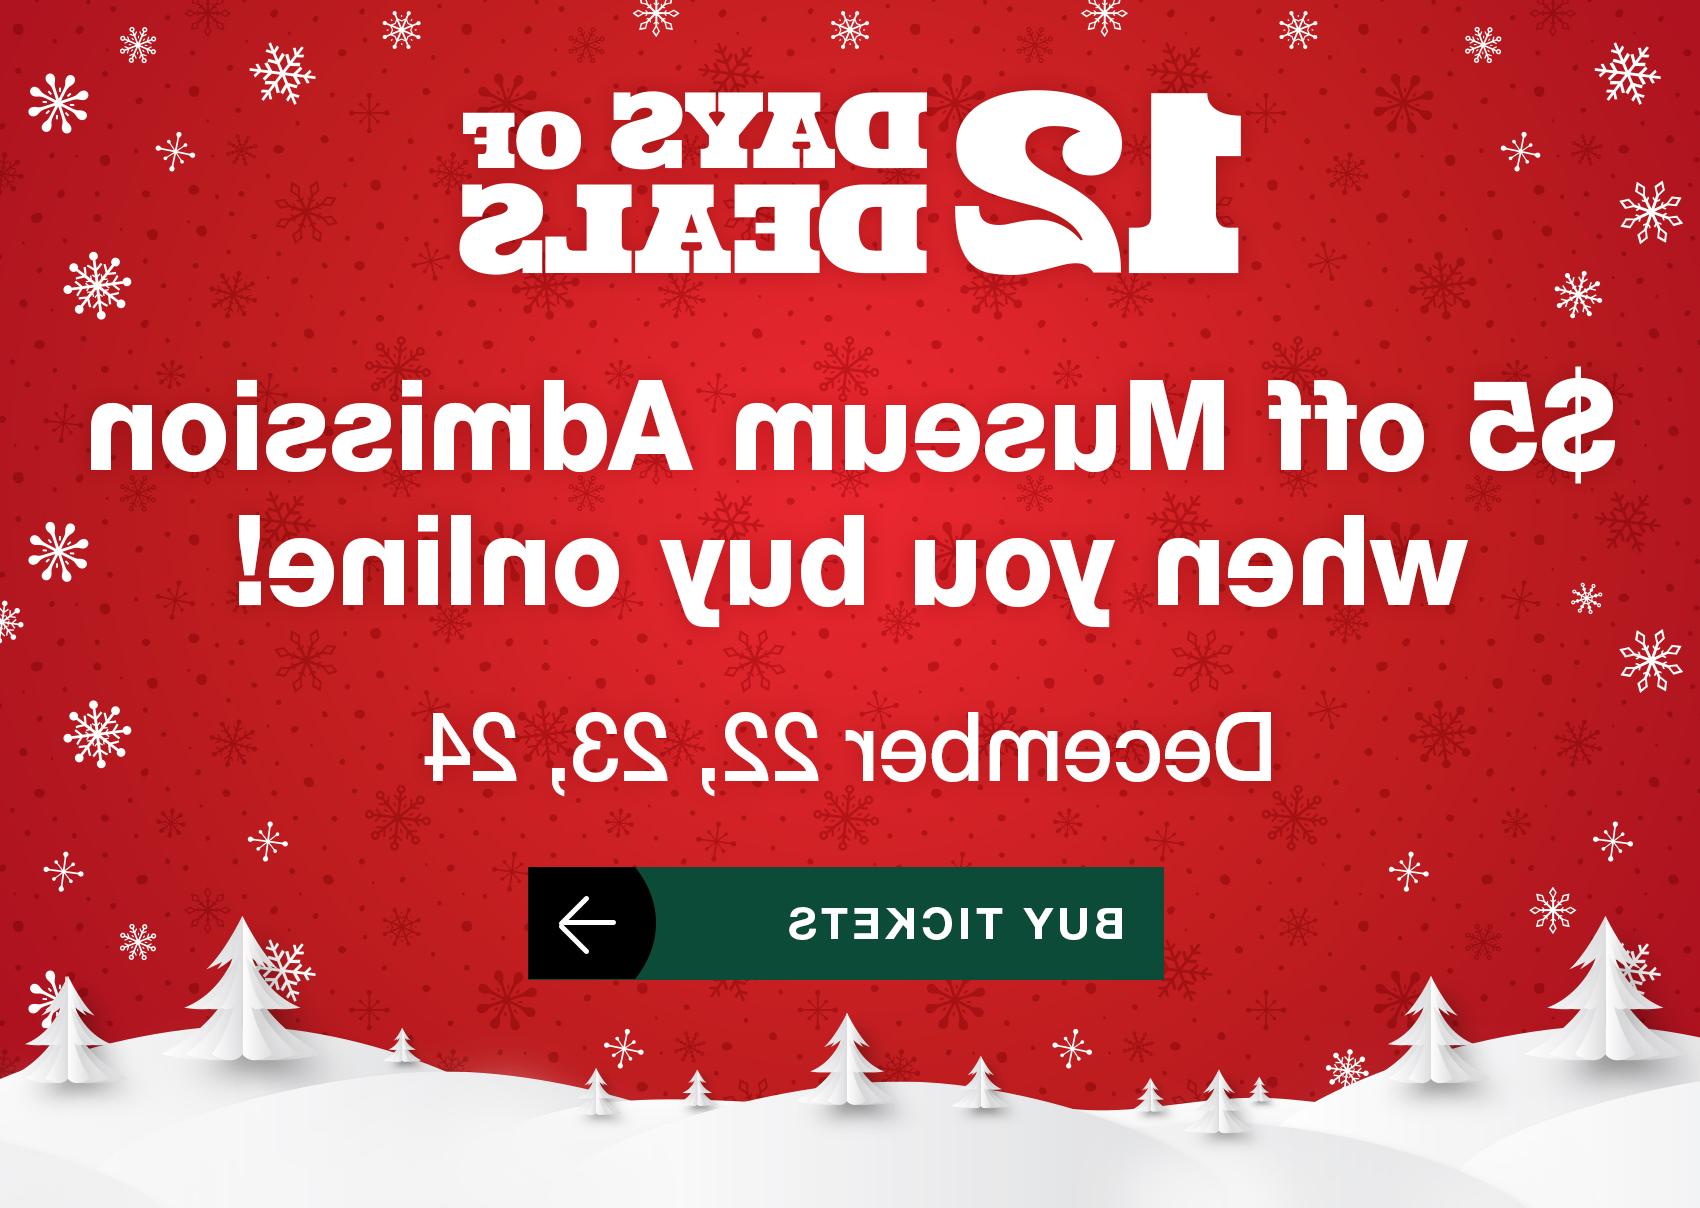 12 Days of Deals! $5 off Museum Admission when you buy online! December 22, 23, 24. 买票.